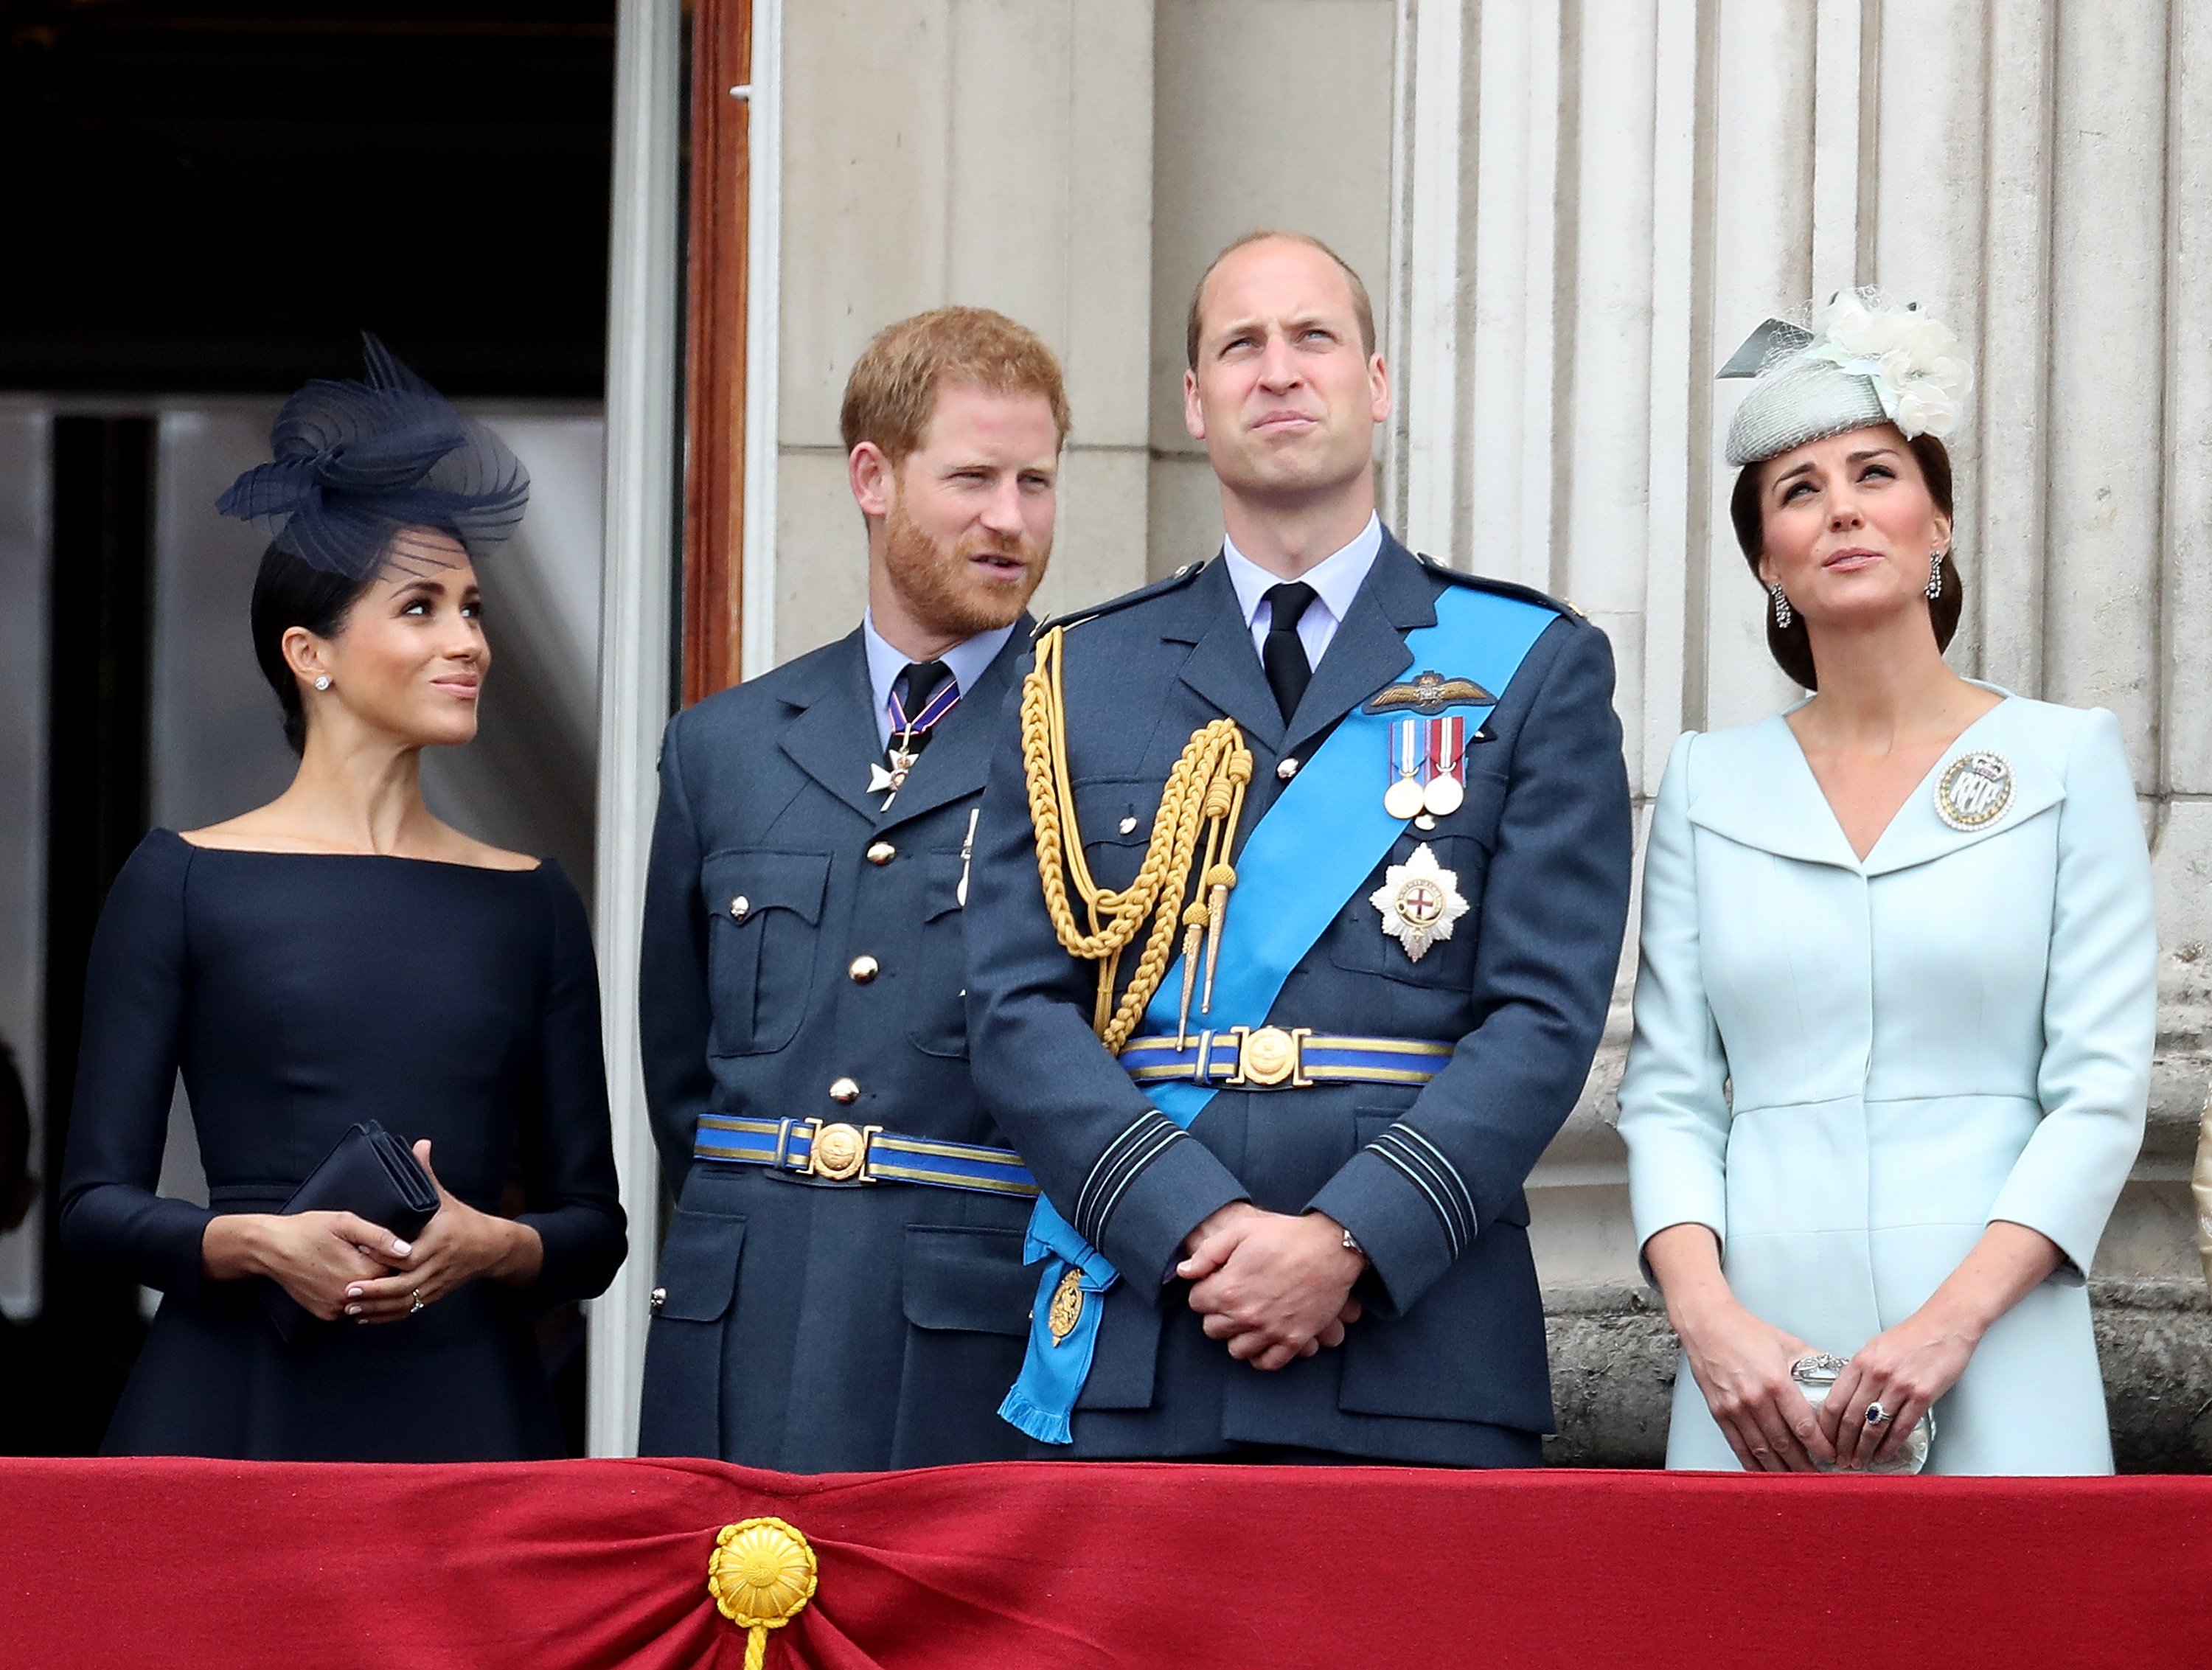 Duchess Meghan, Prince Harry, Prince William, and Duchess Kate watch the RAF flypast on the balcony of Buckingham Palace on July 10, 2018, in London, England. | Source: Getty Images